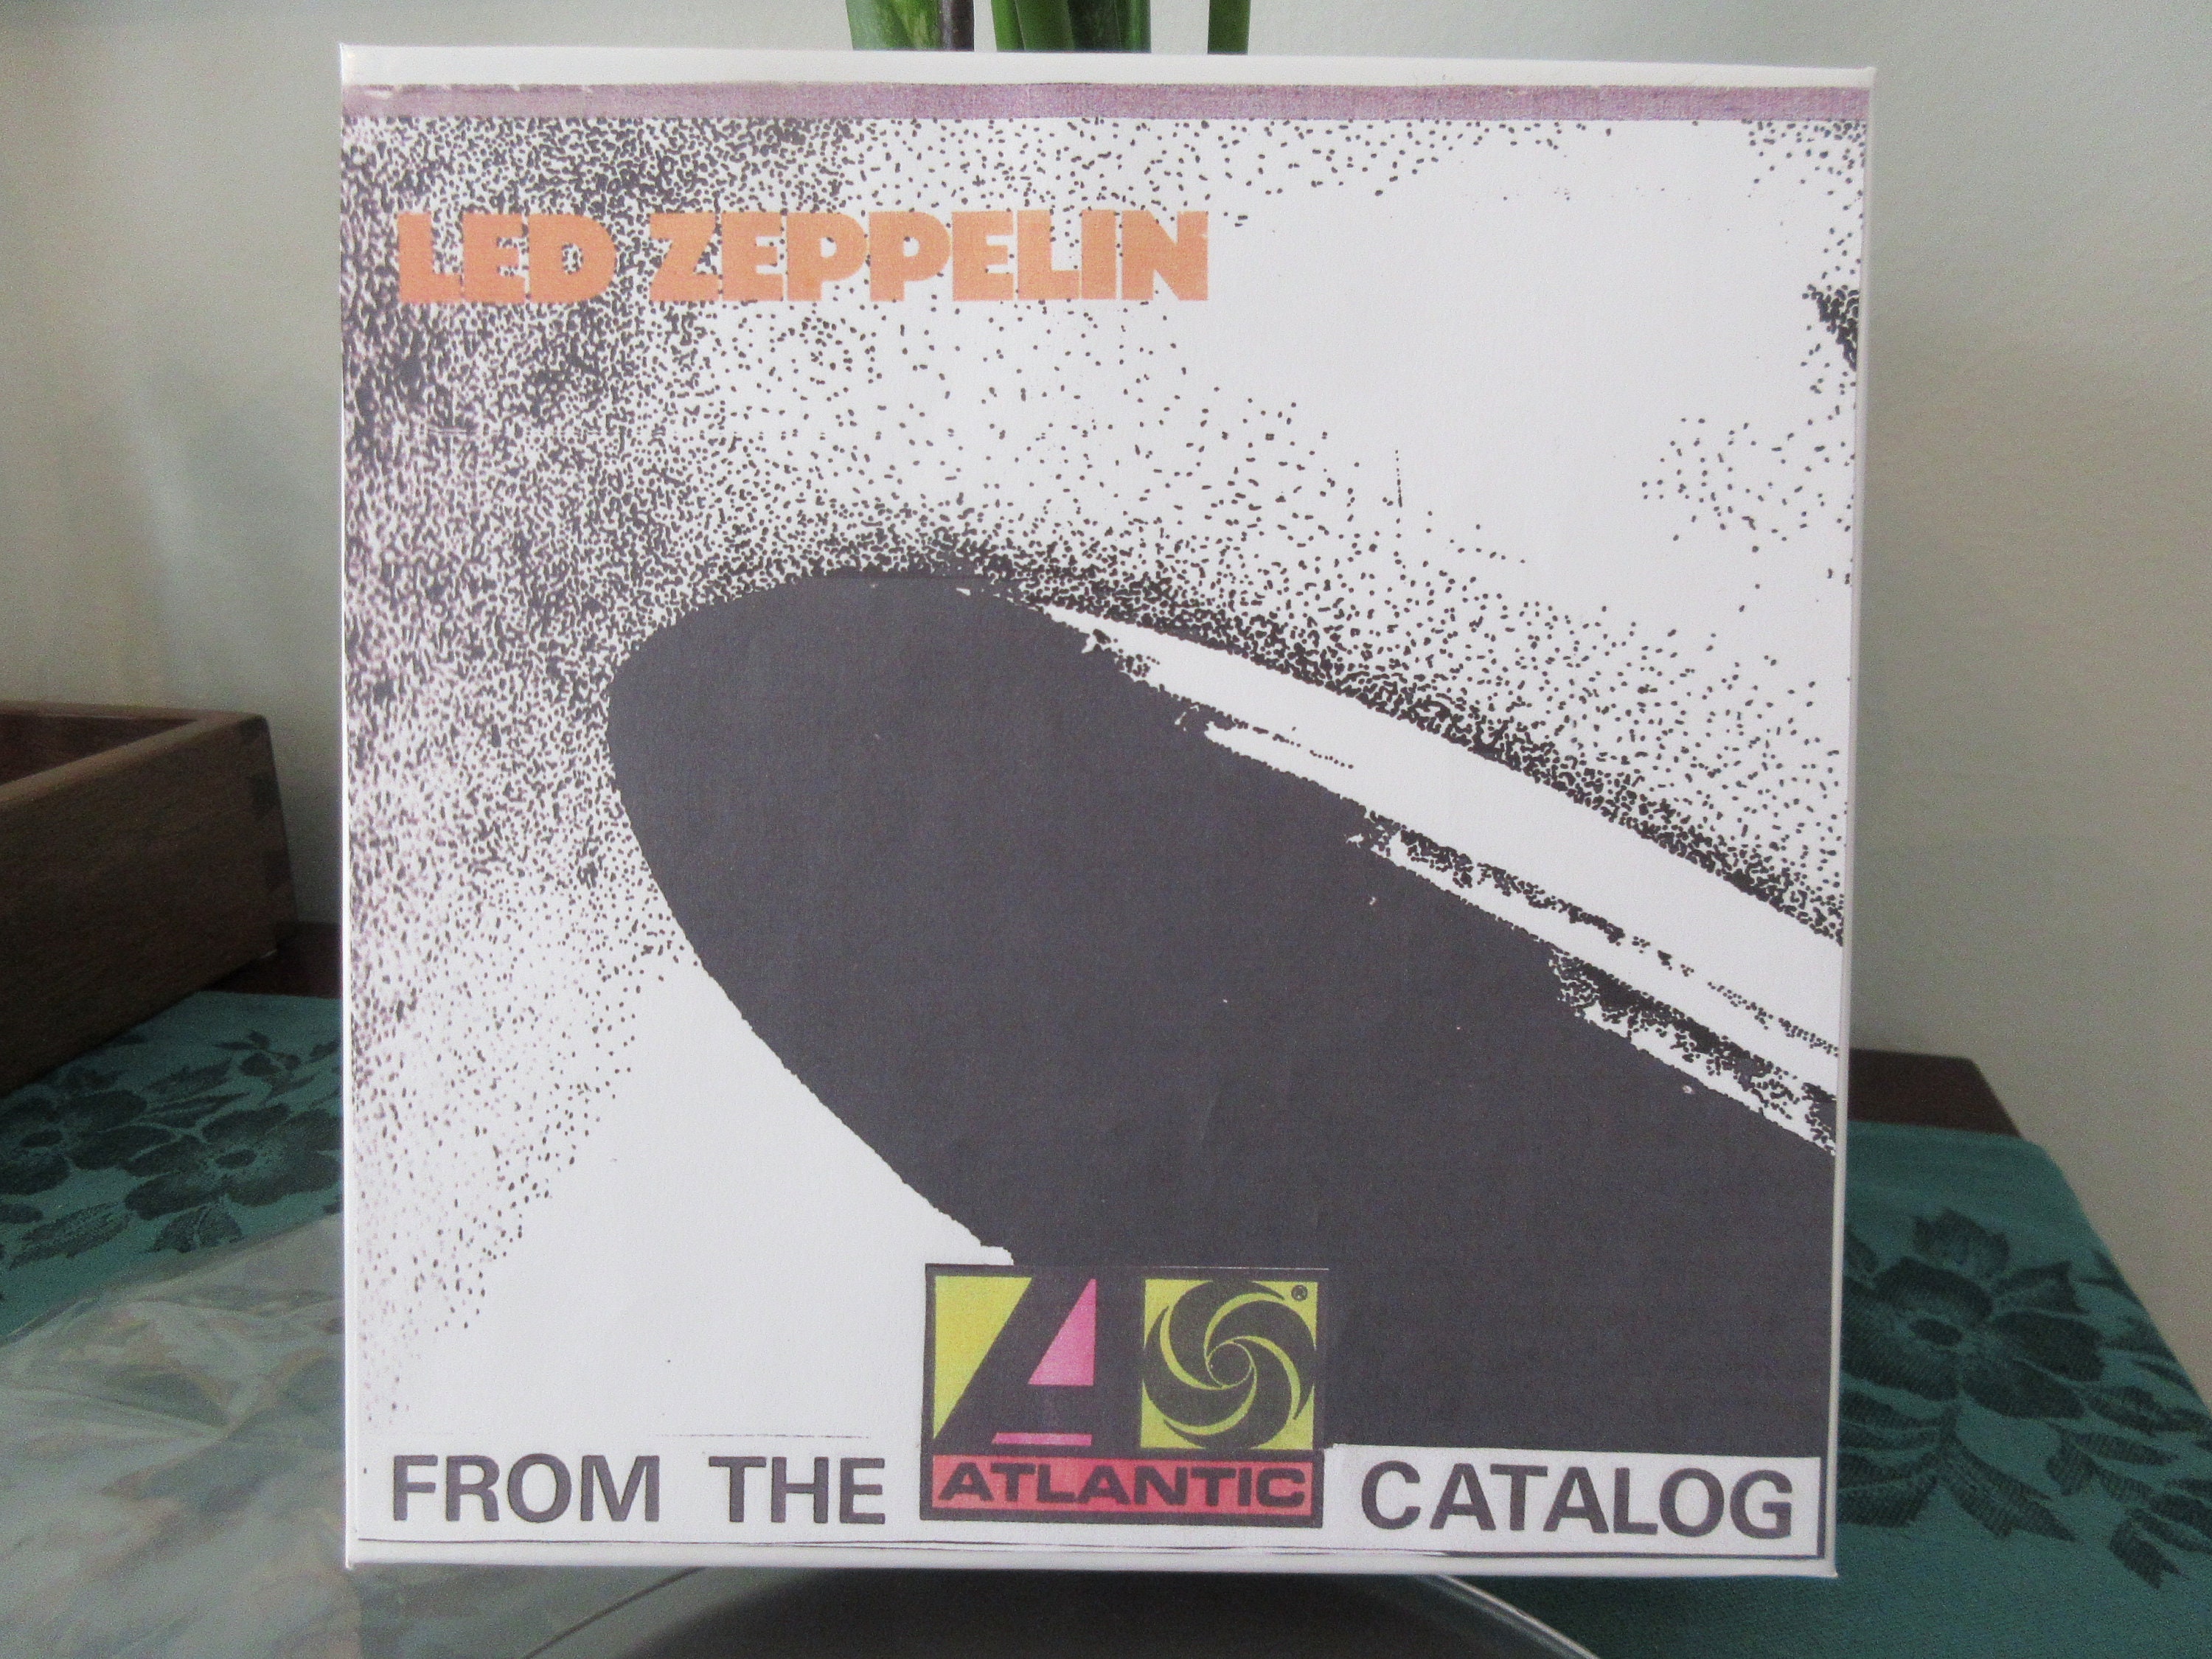 Led Zeppelin Reel to Reel Tape Music at 7 1/2 Speed Classic 1st LP Stereo  Analogue Recording 